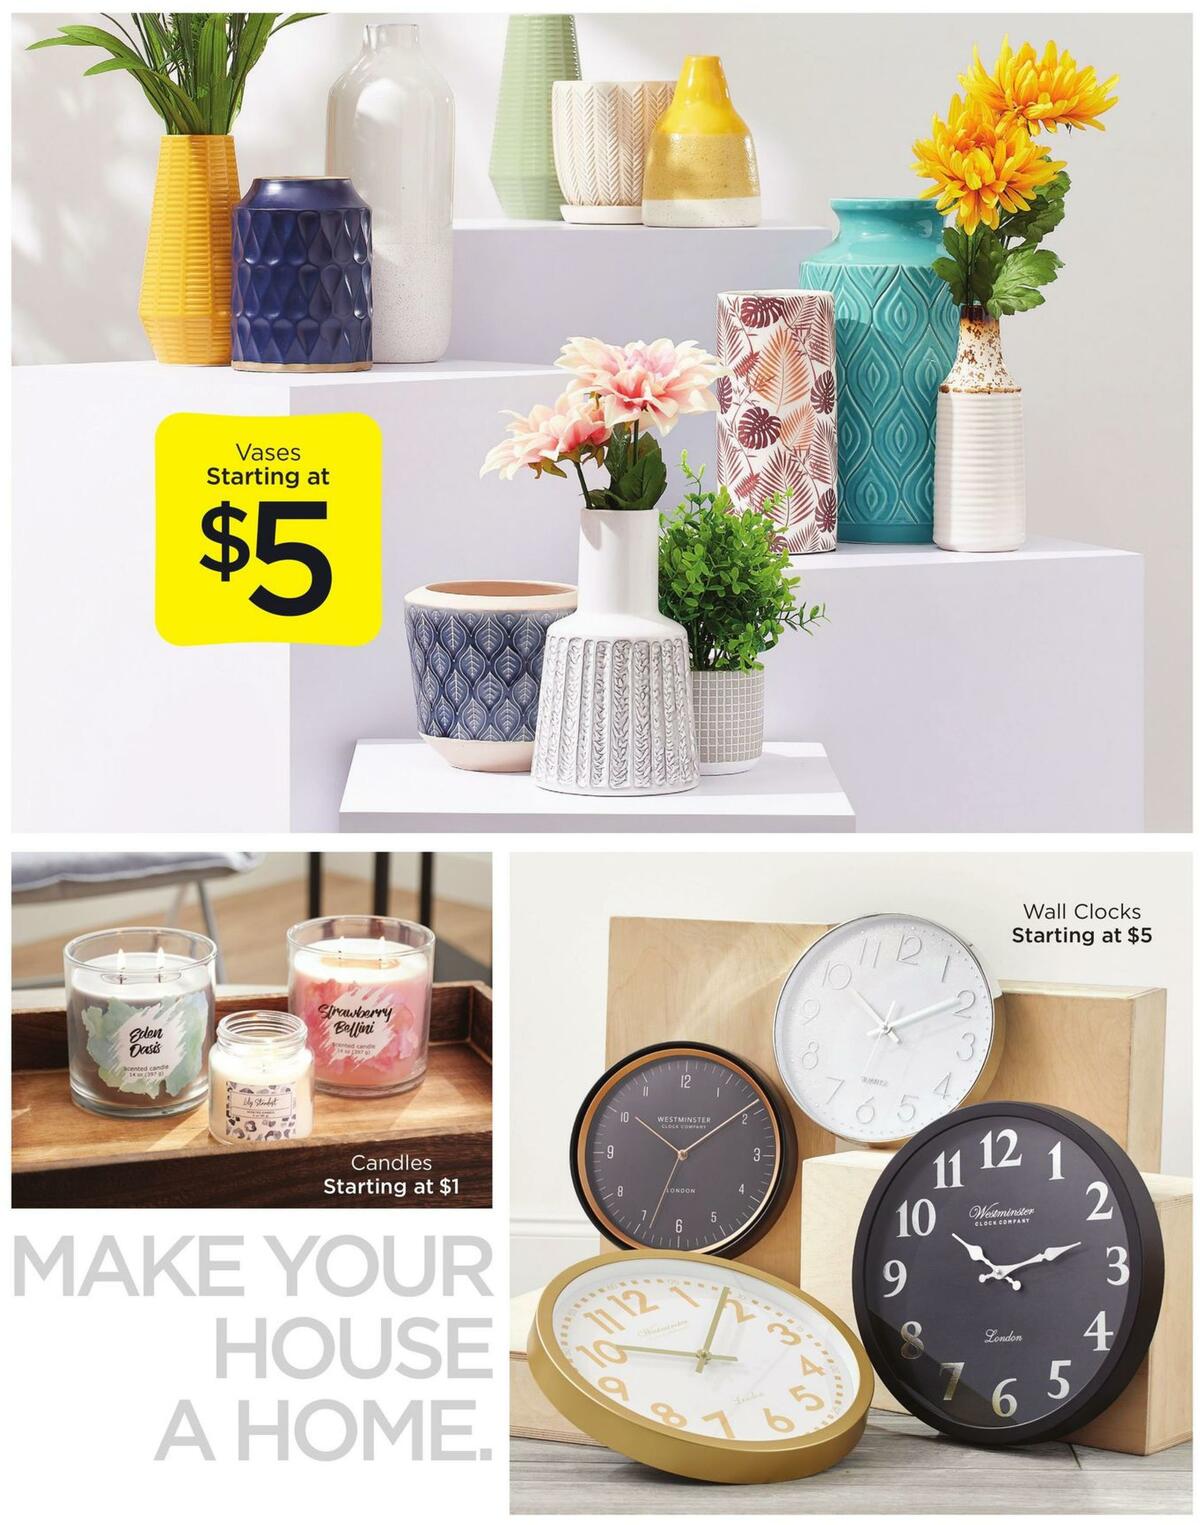 Dollar General Unexpected Finds. Unlimited Savings. Weekly Ad from June 27